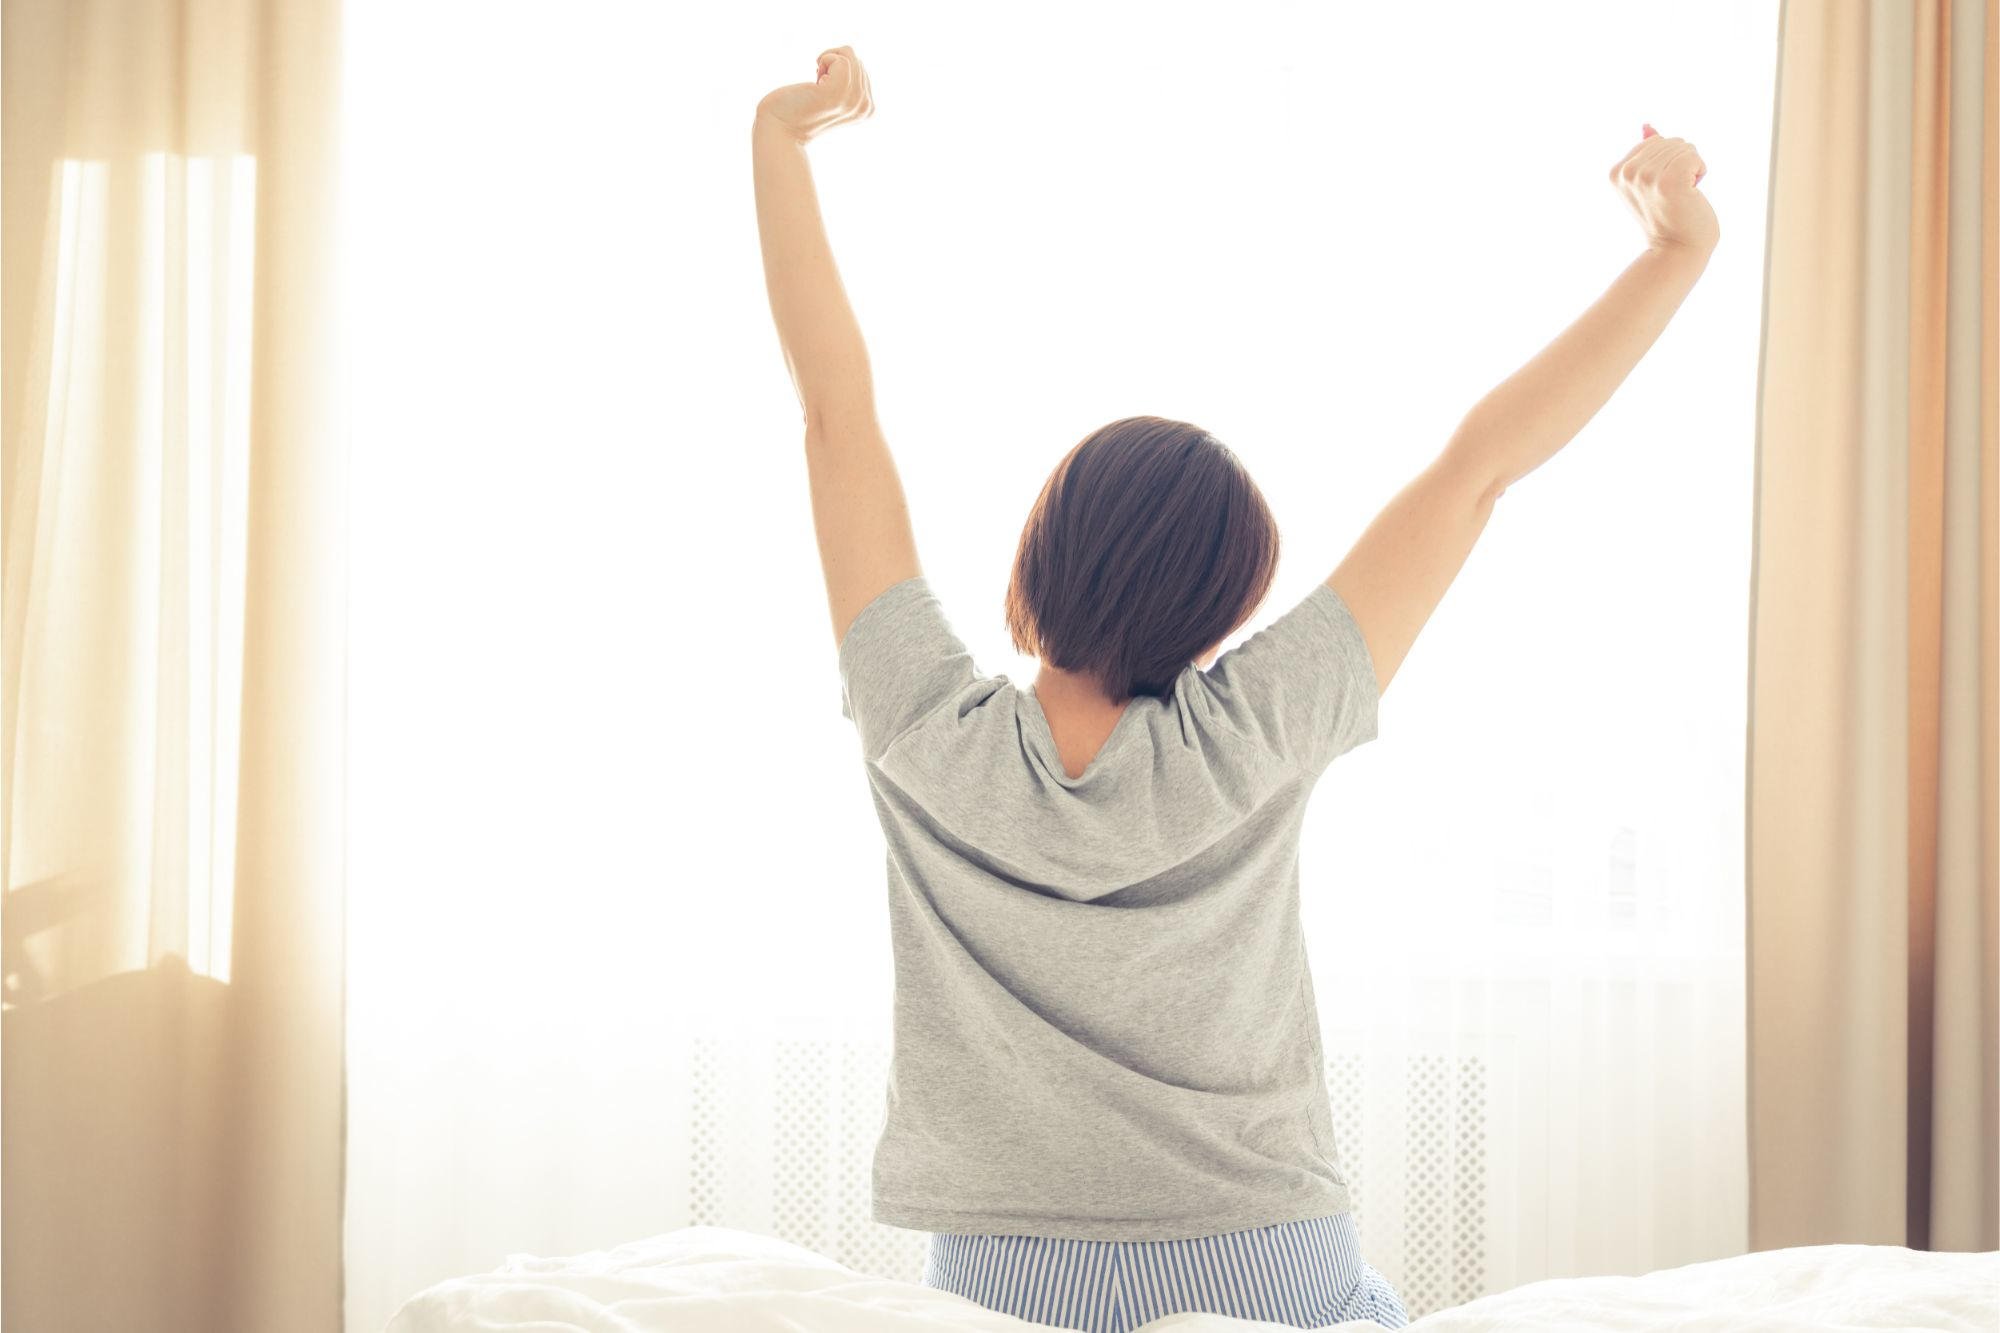 Do you like sleeping in the morning? Science reports that you're